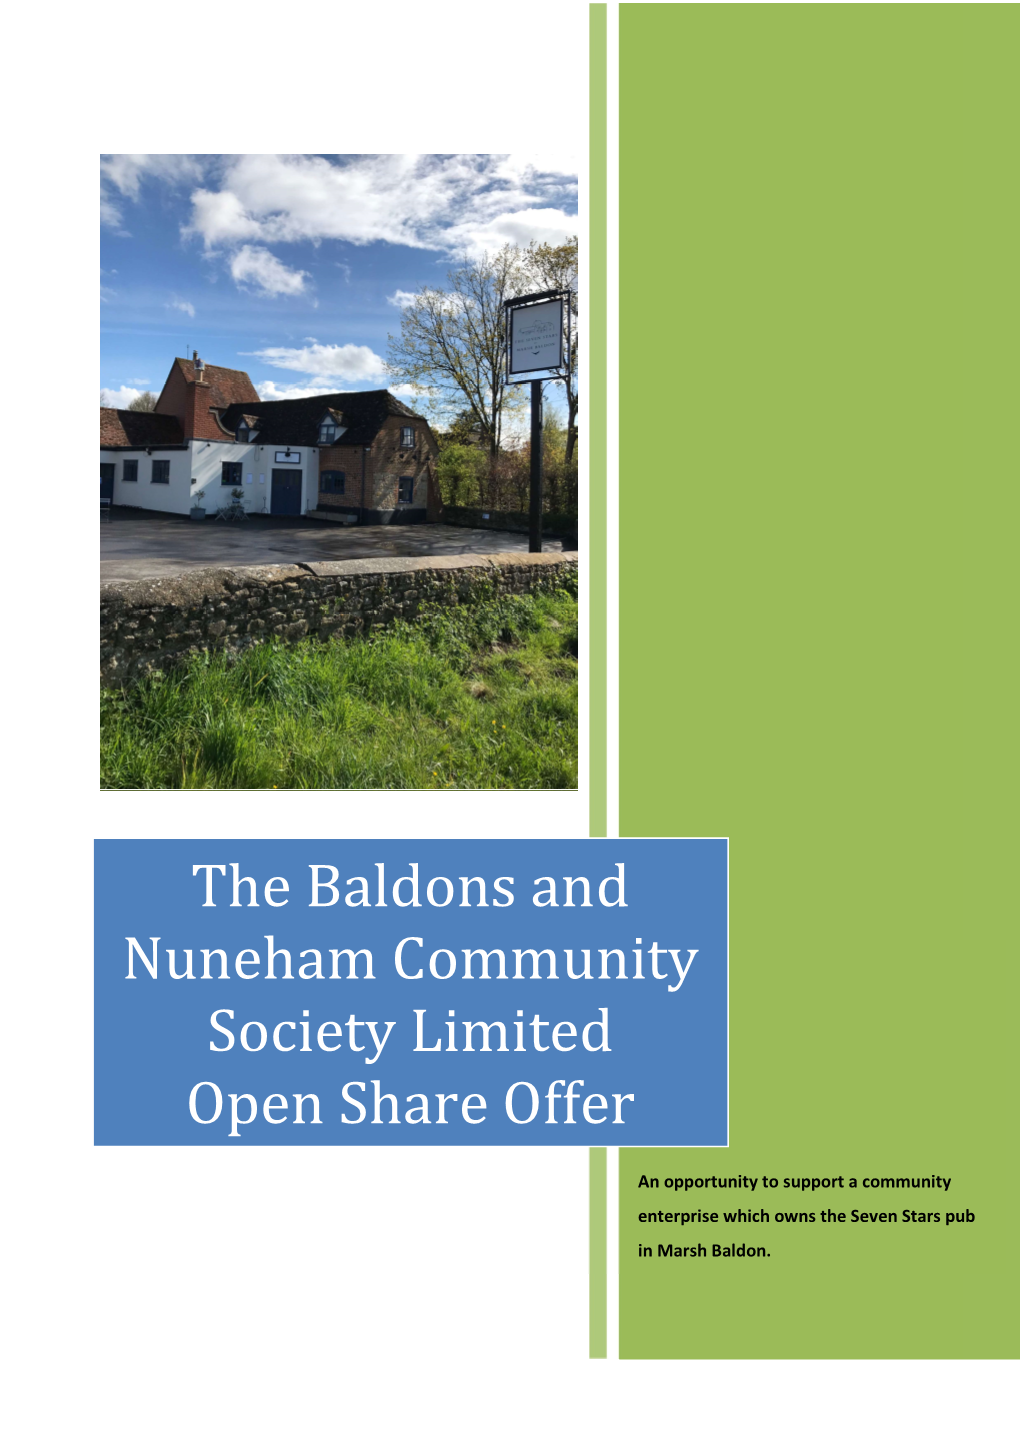 The Baldons and Nuneham Community Society Limited Open Share Offer